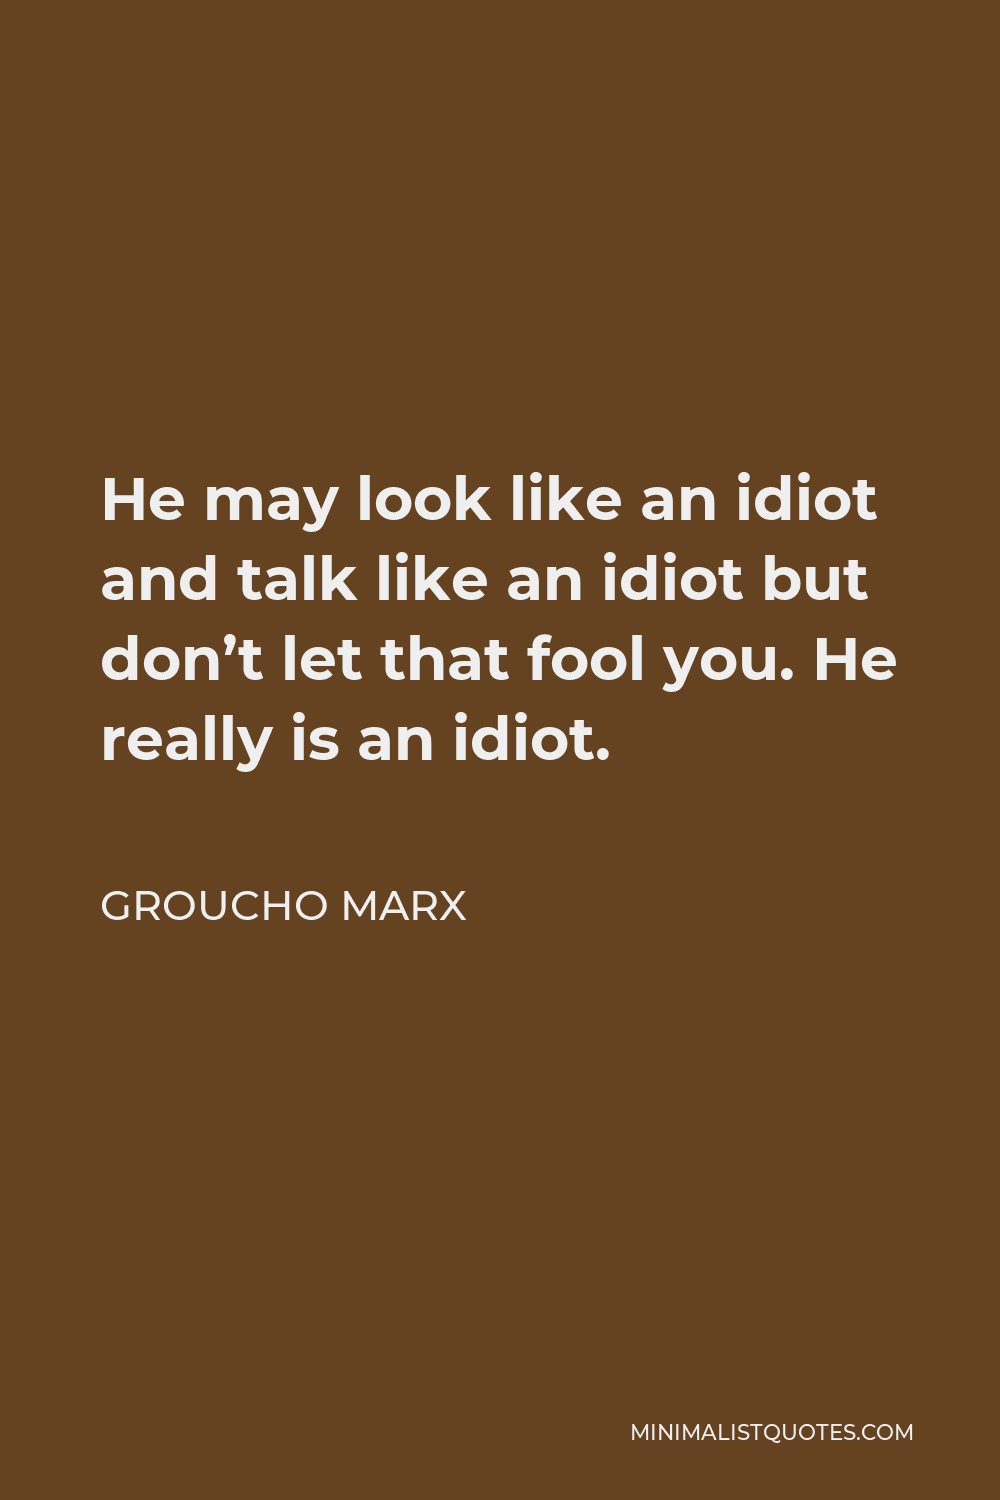 Groucho Marx Quote - He may look like an idiot and talk like an idiot but don’t let that fool you. He really is an idiot.